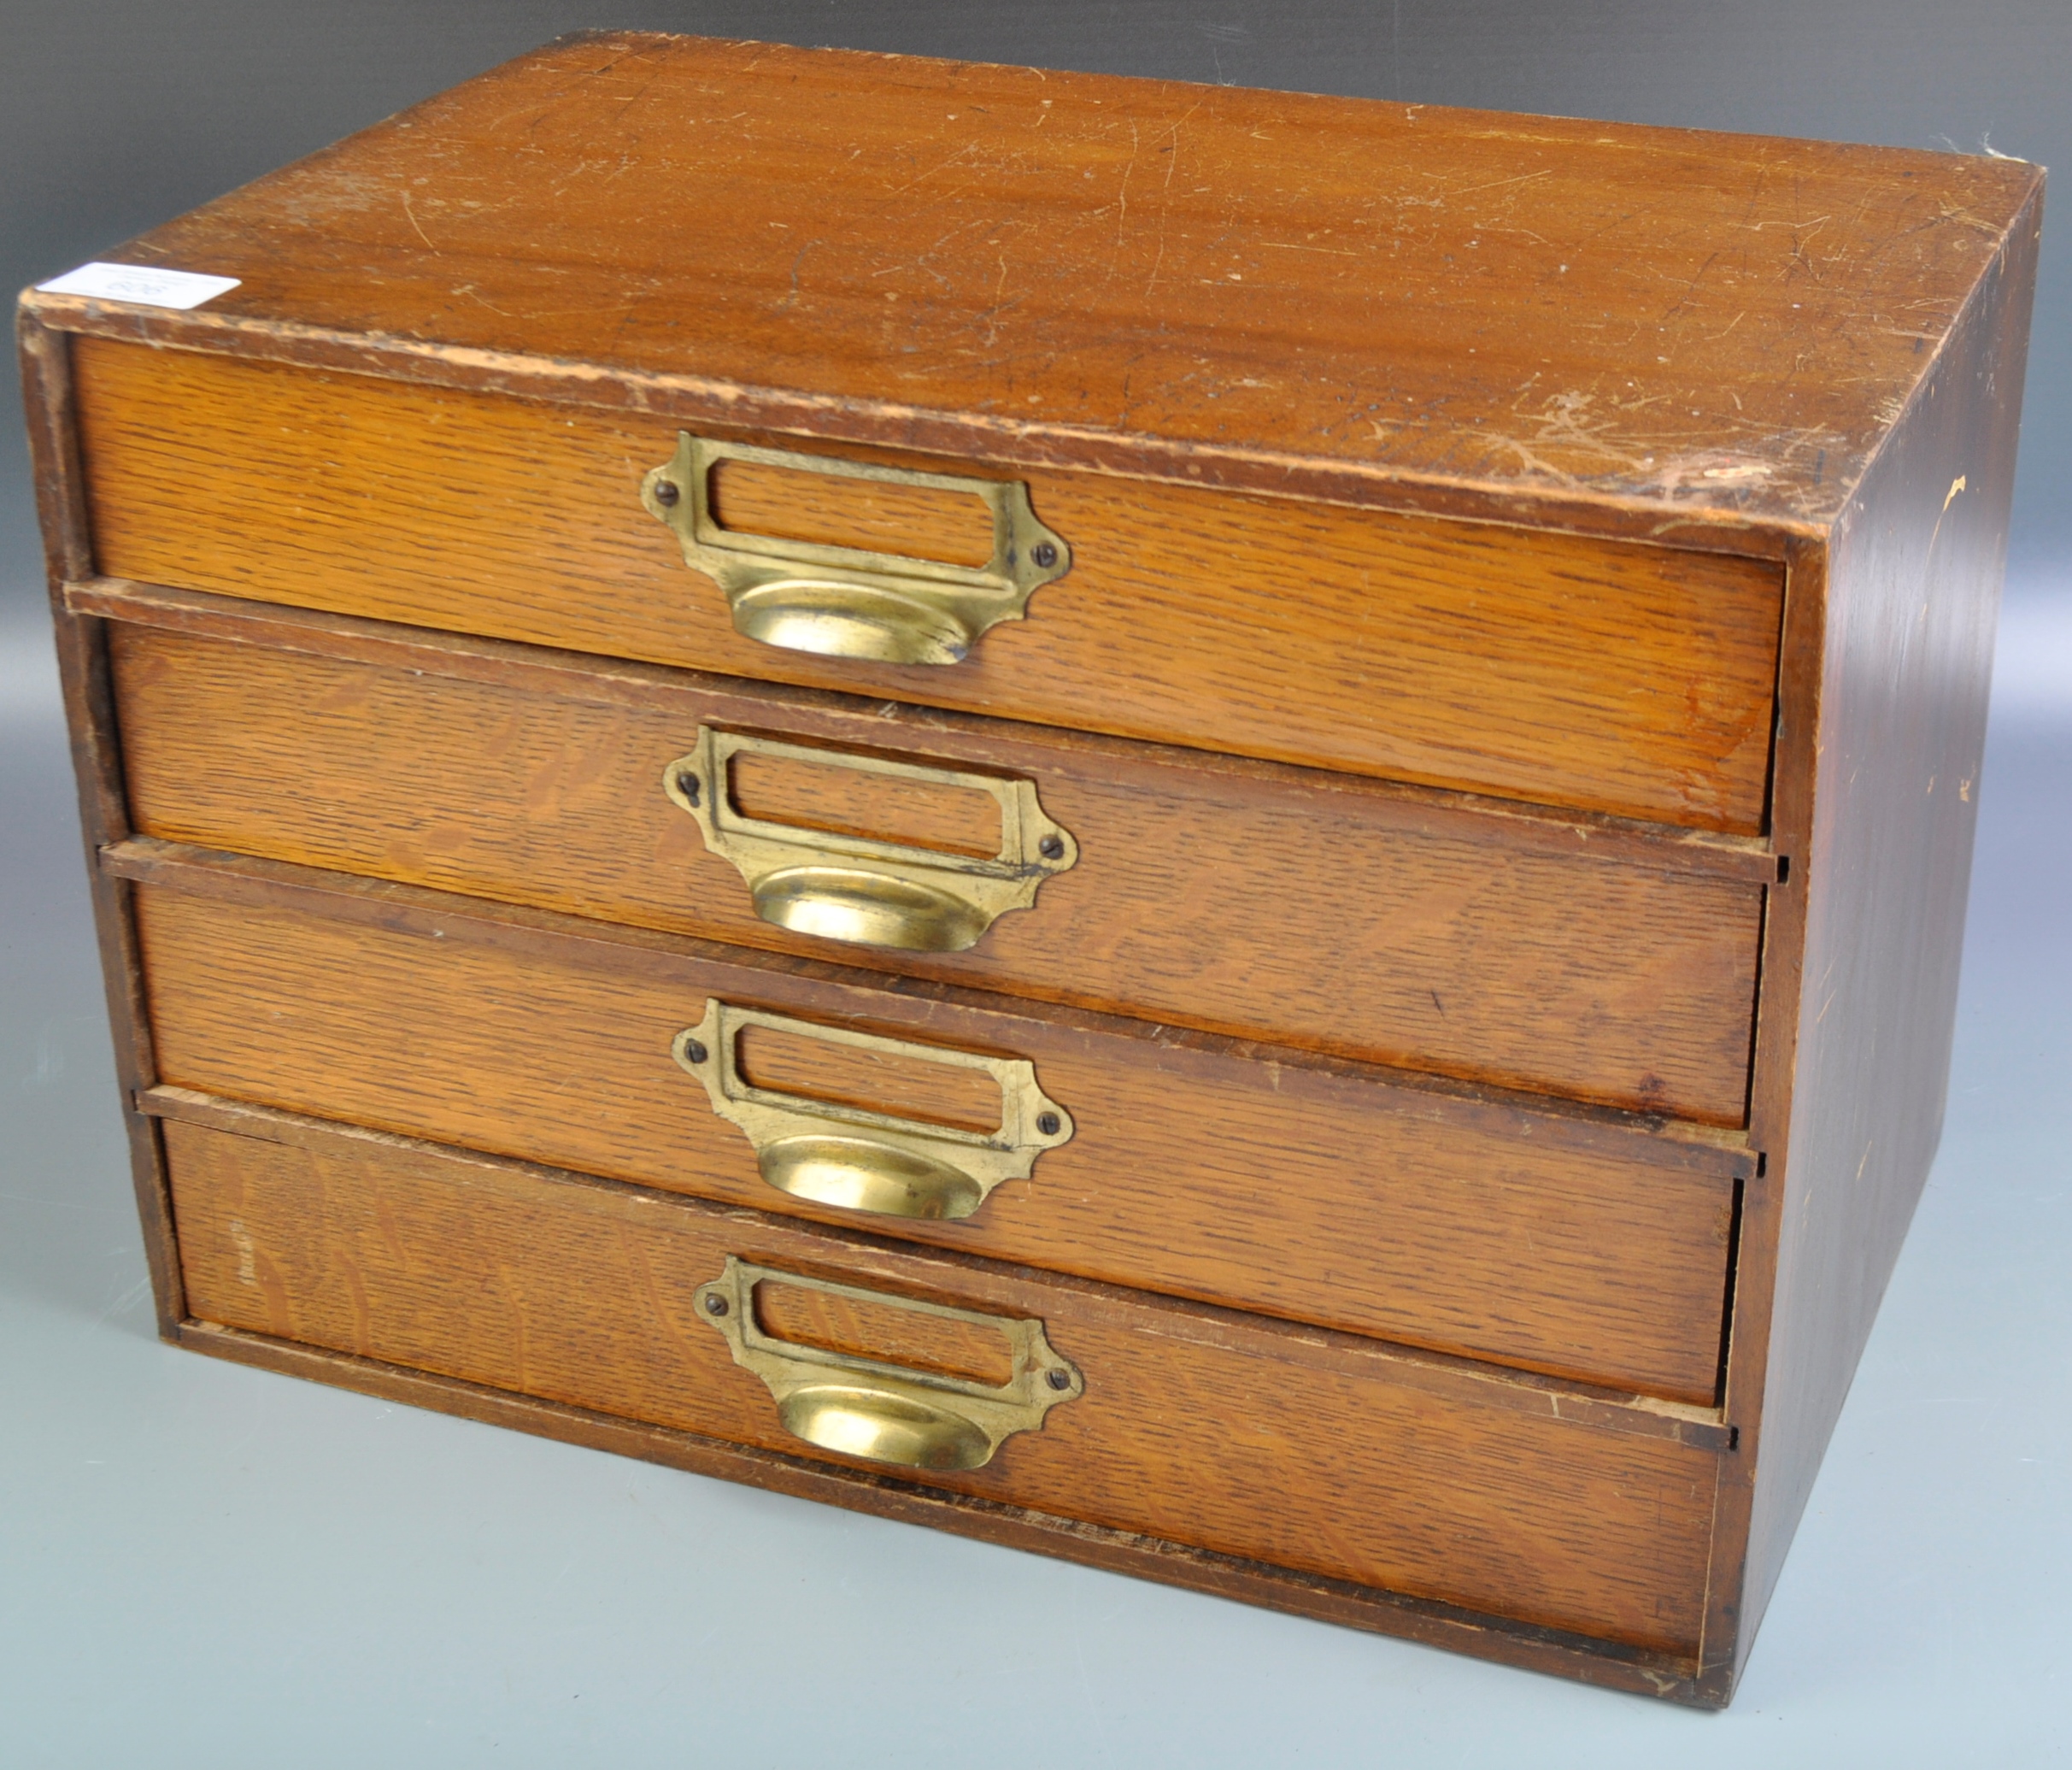 EARLY 20TH CENTURY OAK DESKTOP FILLING CABINET / CHEST OF DRAWERS - Image 2 of 8